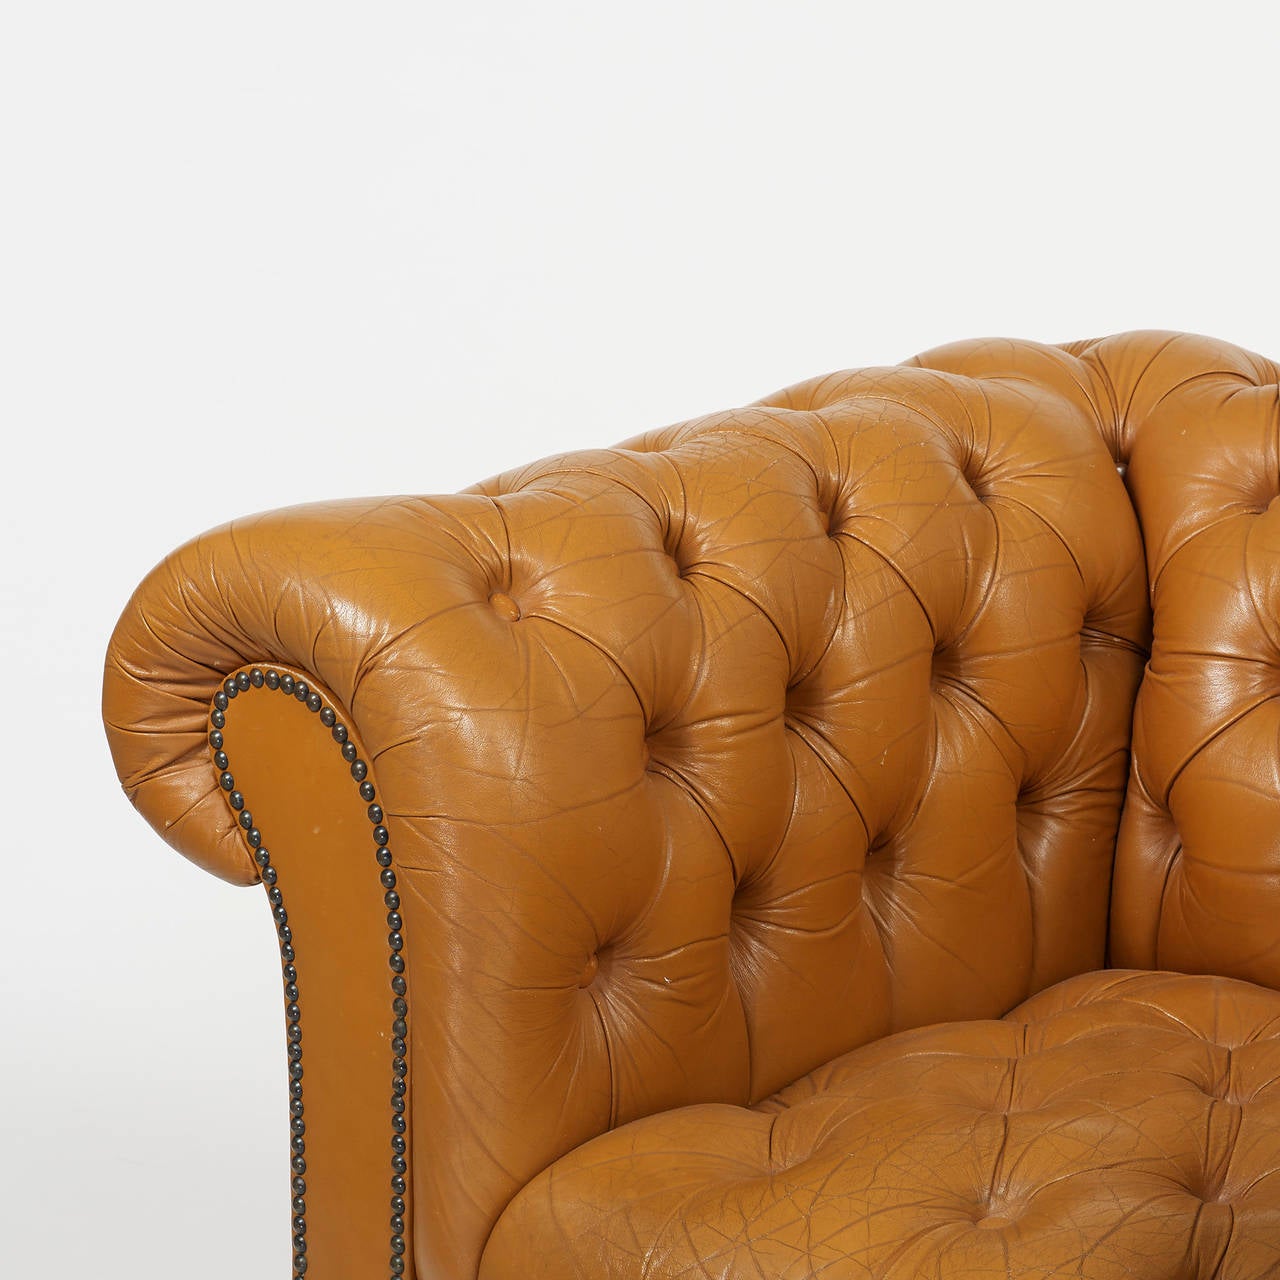 European Pair of Chesterfield Lounge Chairs